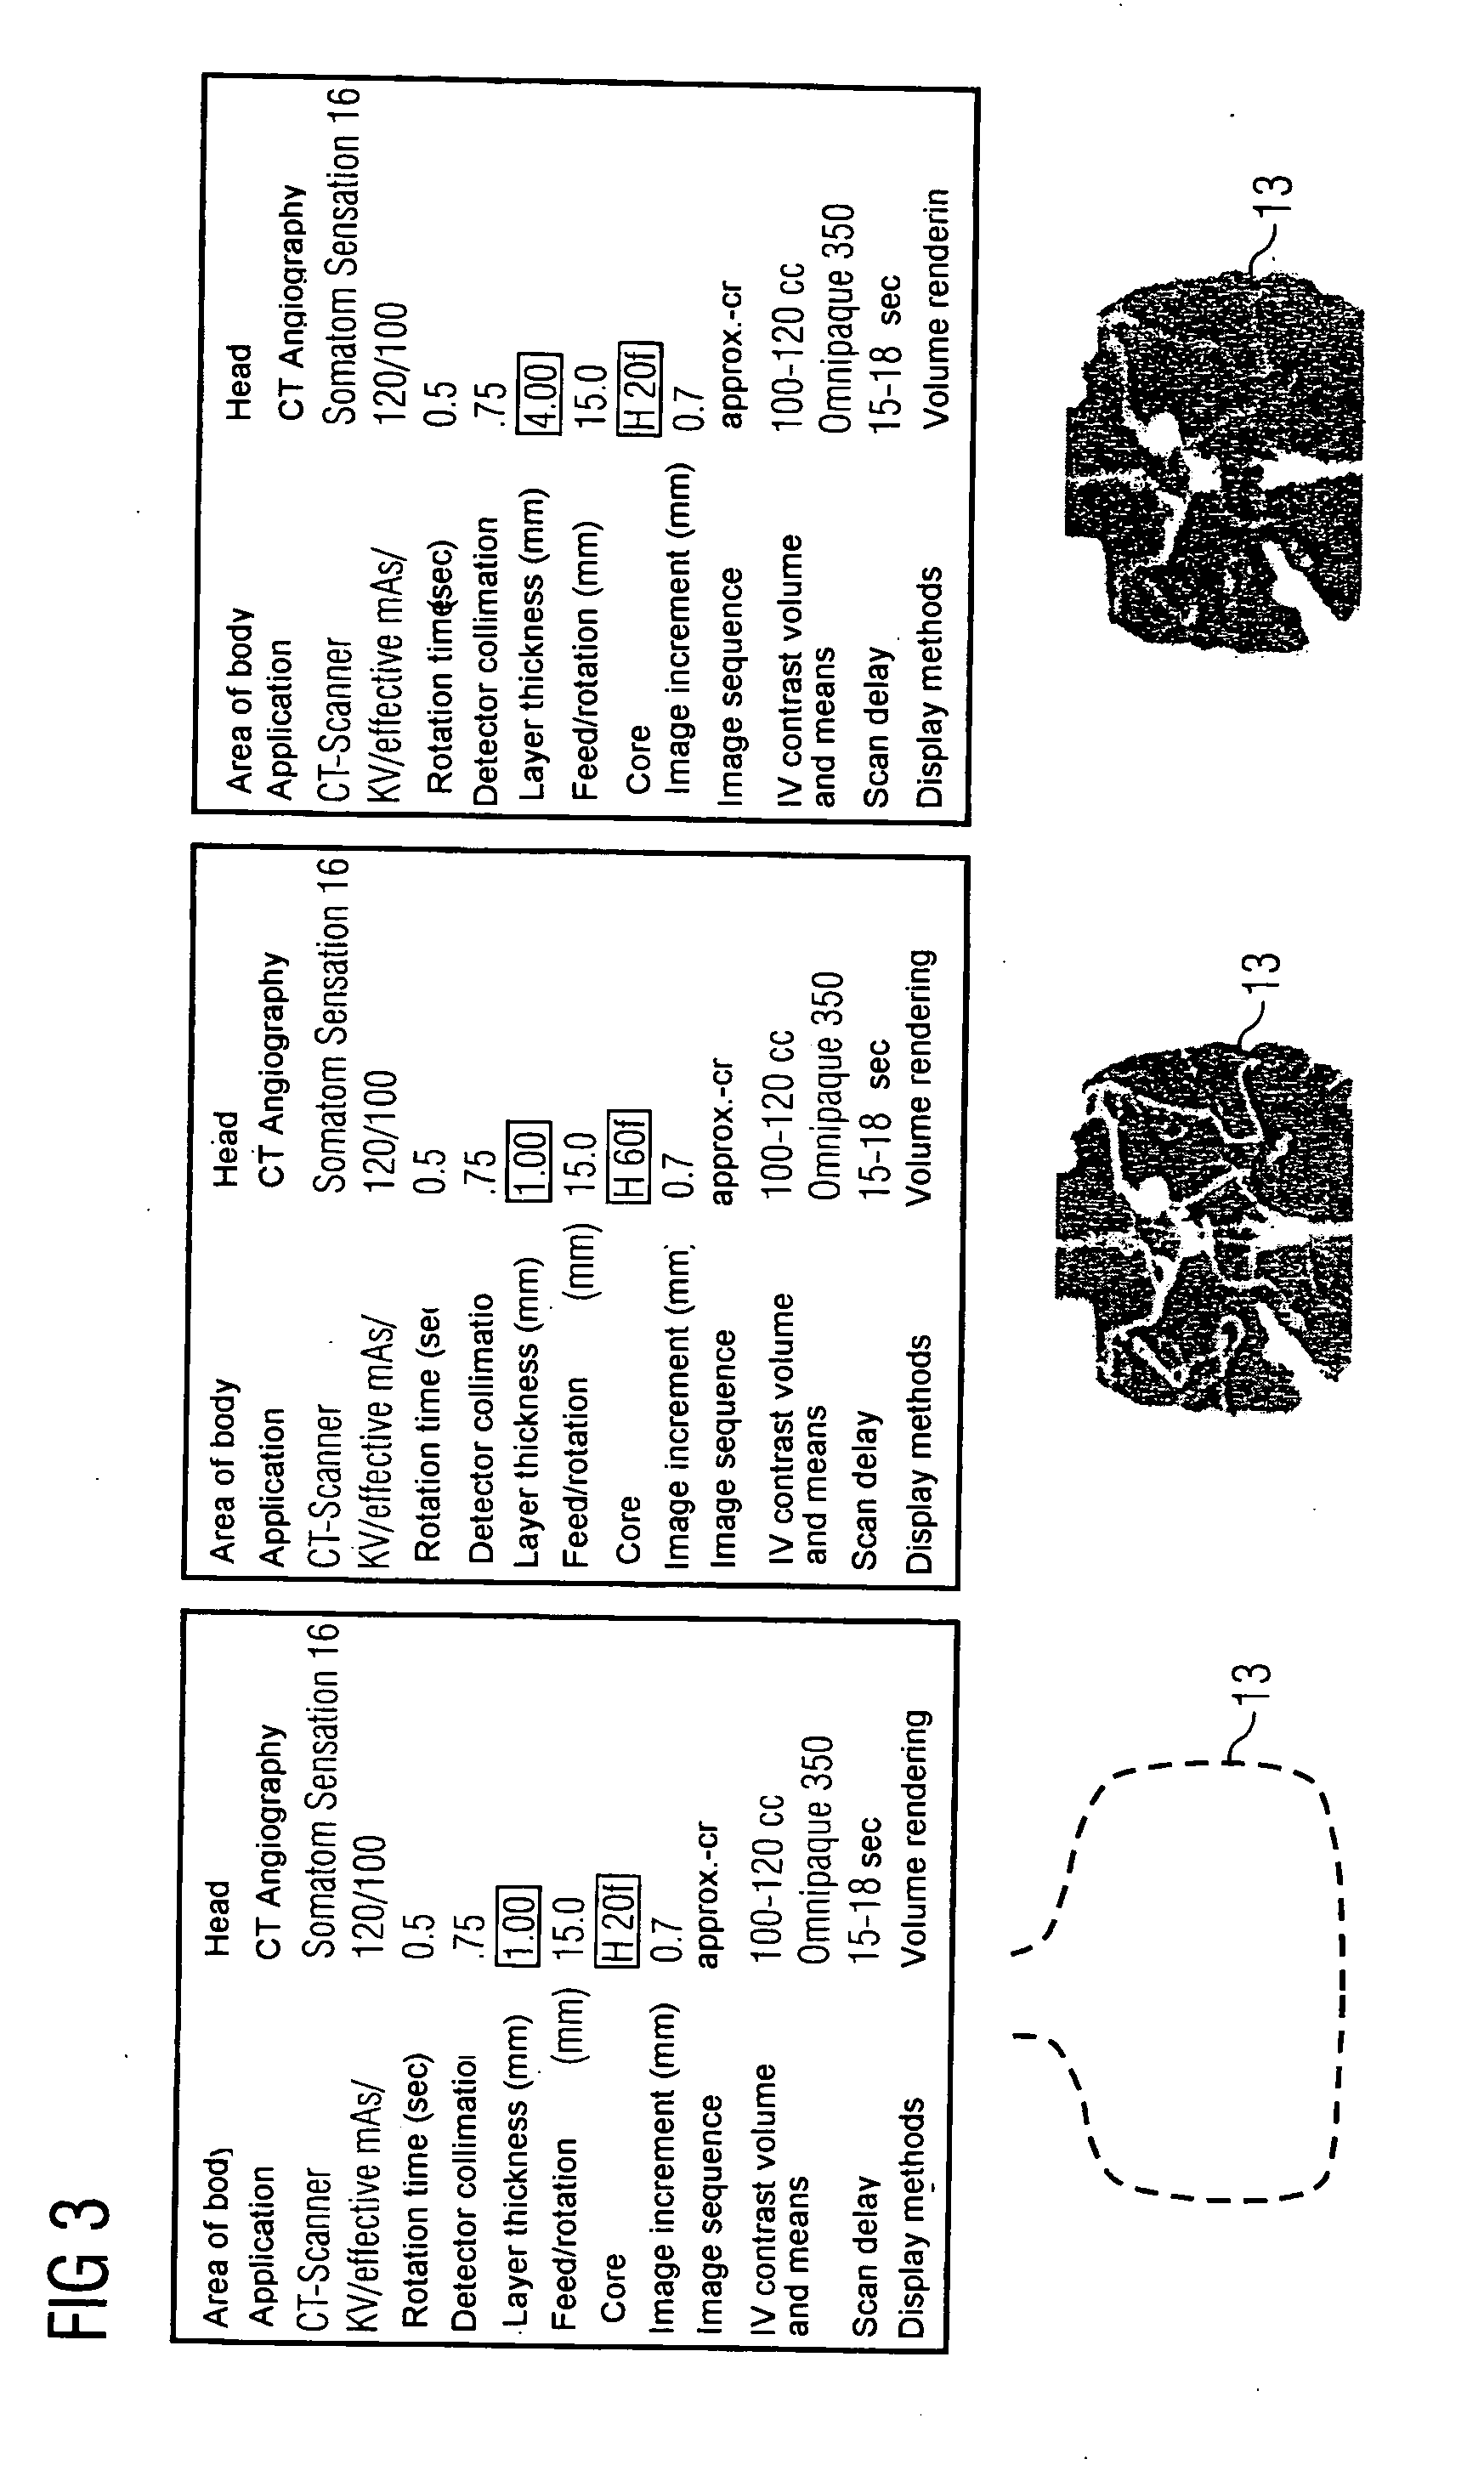 Device for monitoring an operating parameter of a medical device